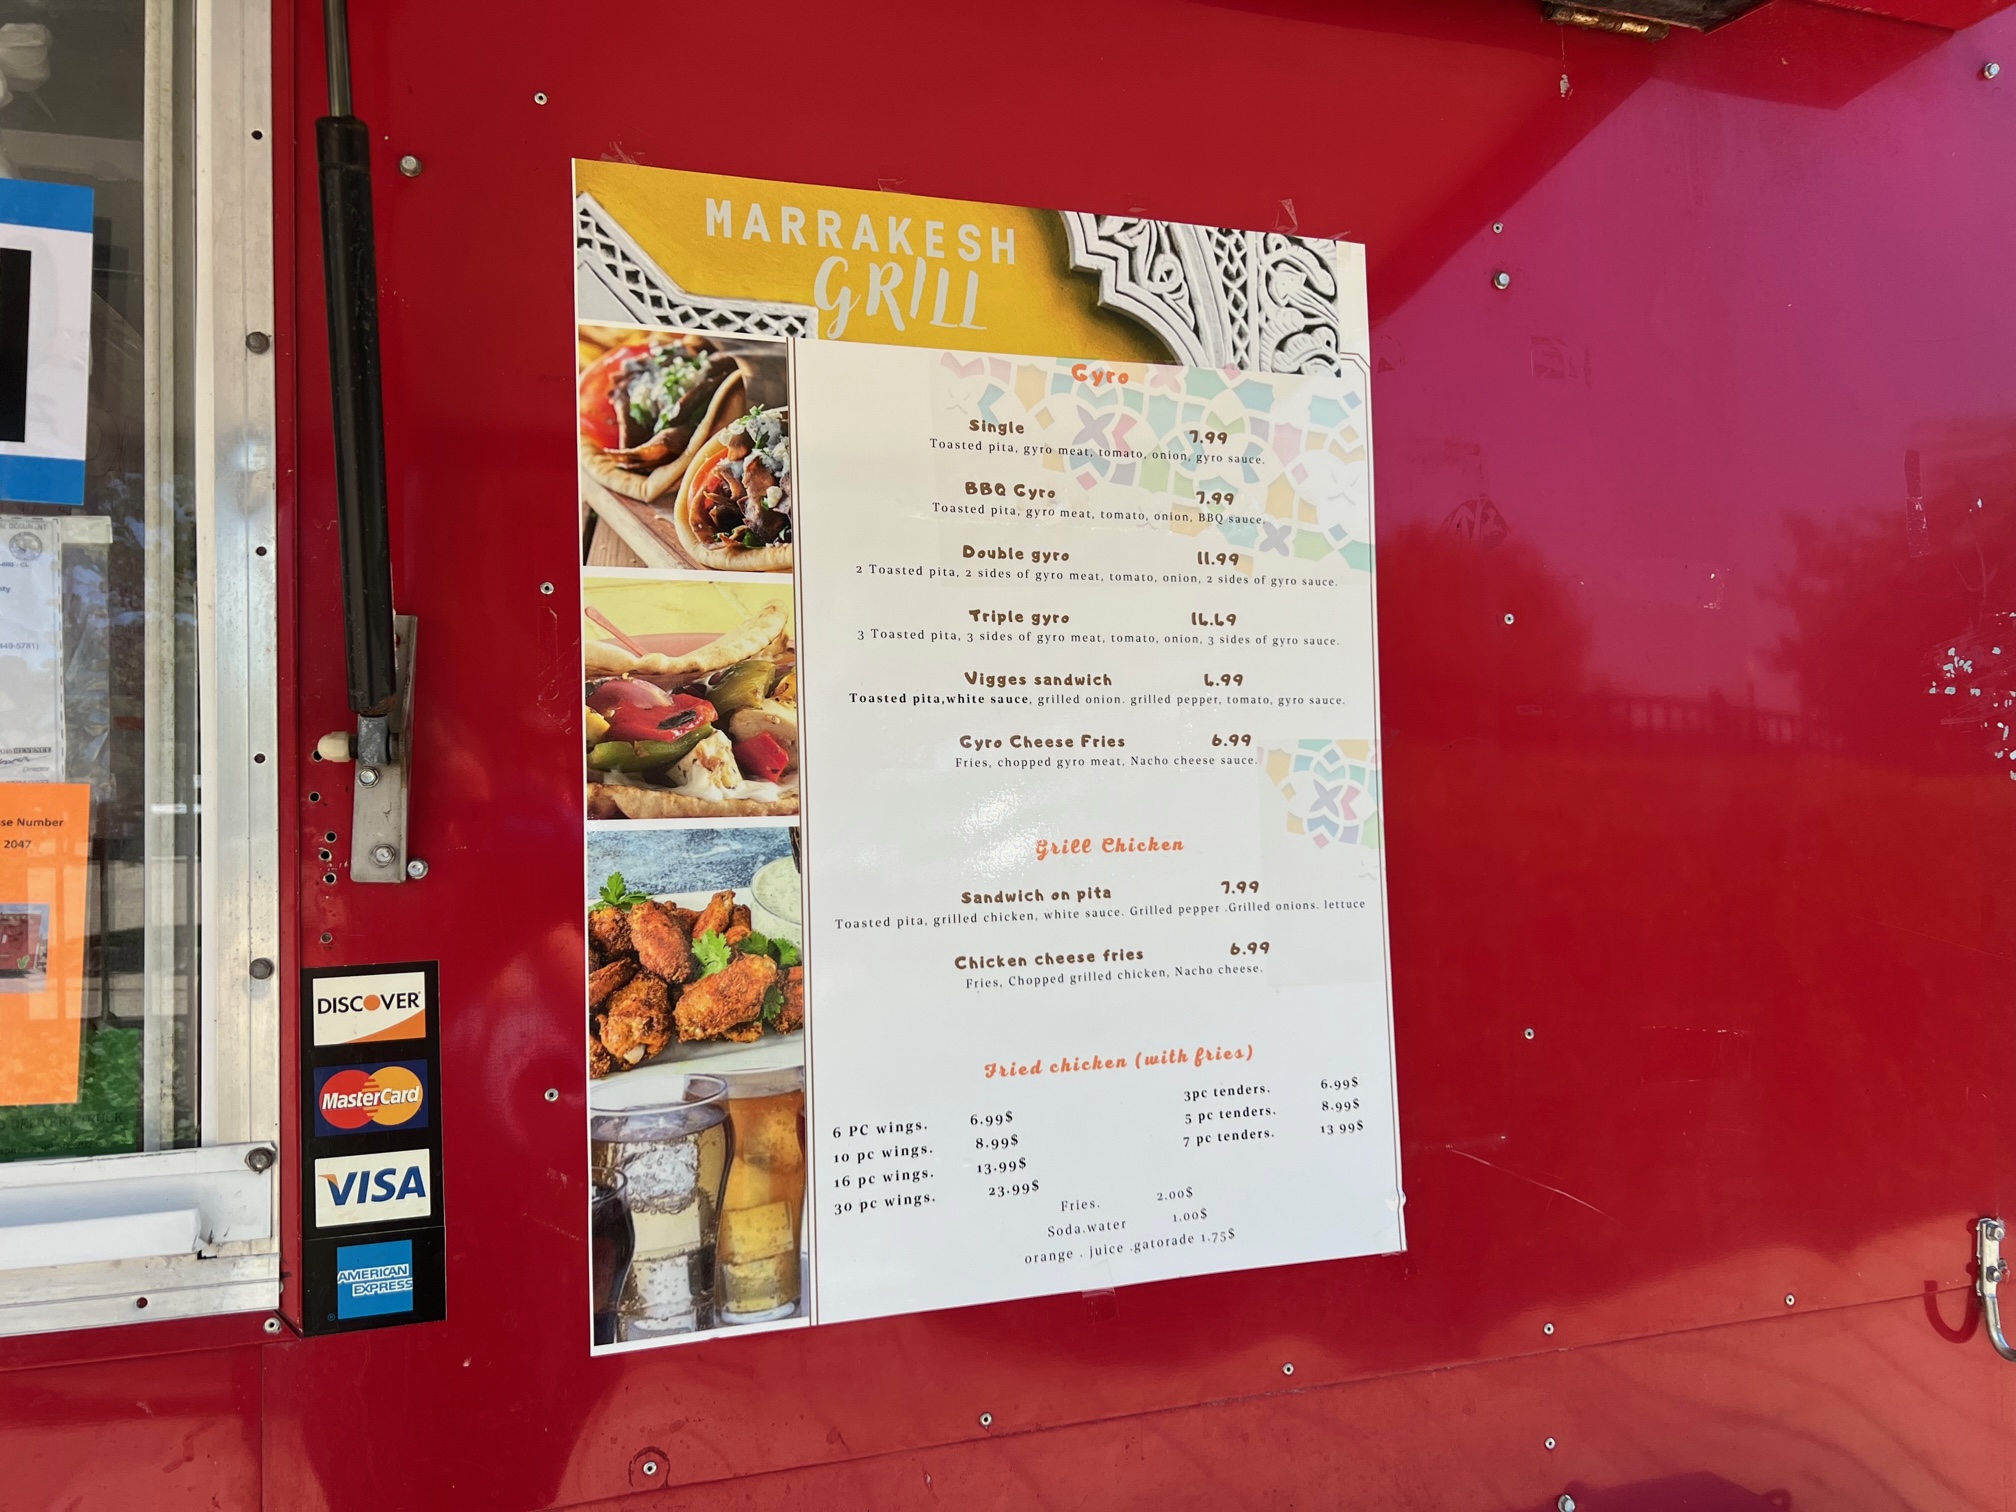 The white menu is posted on the red food truck. Photo by Alyssa Buckley.